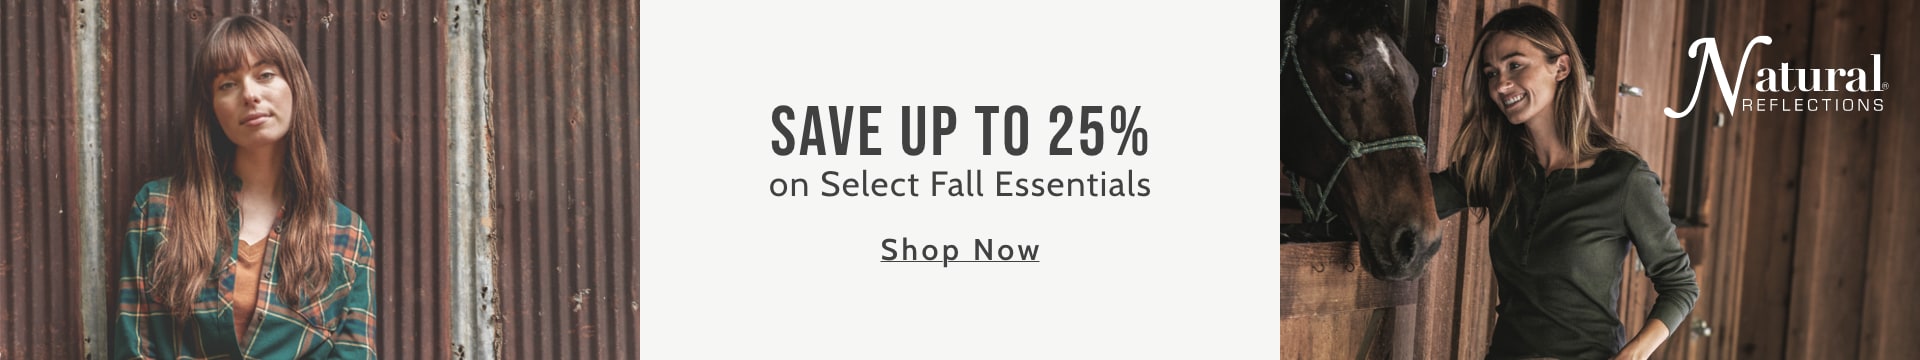 Save up to 25% on Select Fall Essentials